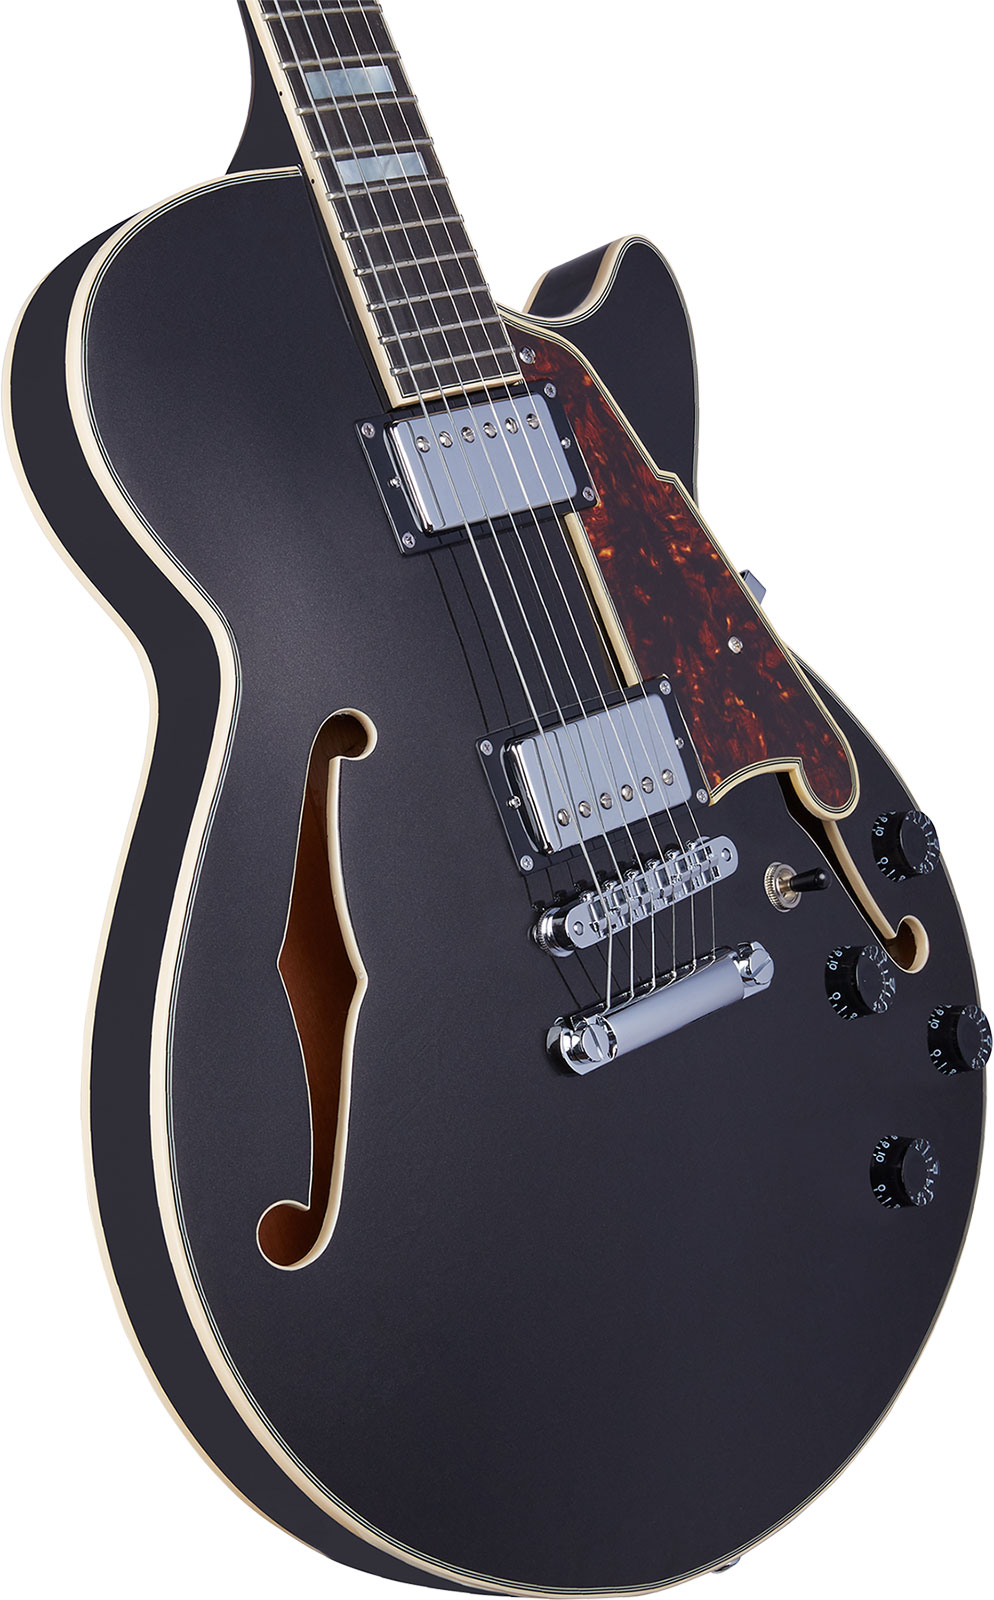 D'angelico Ss Premier 2h Ht Ova - Black Flake - Semi-hollow electric guitar - Variation 3